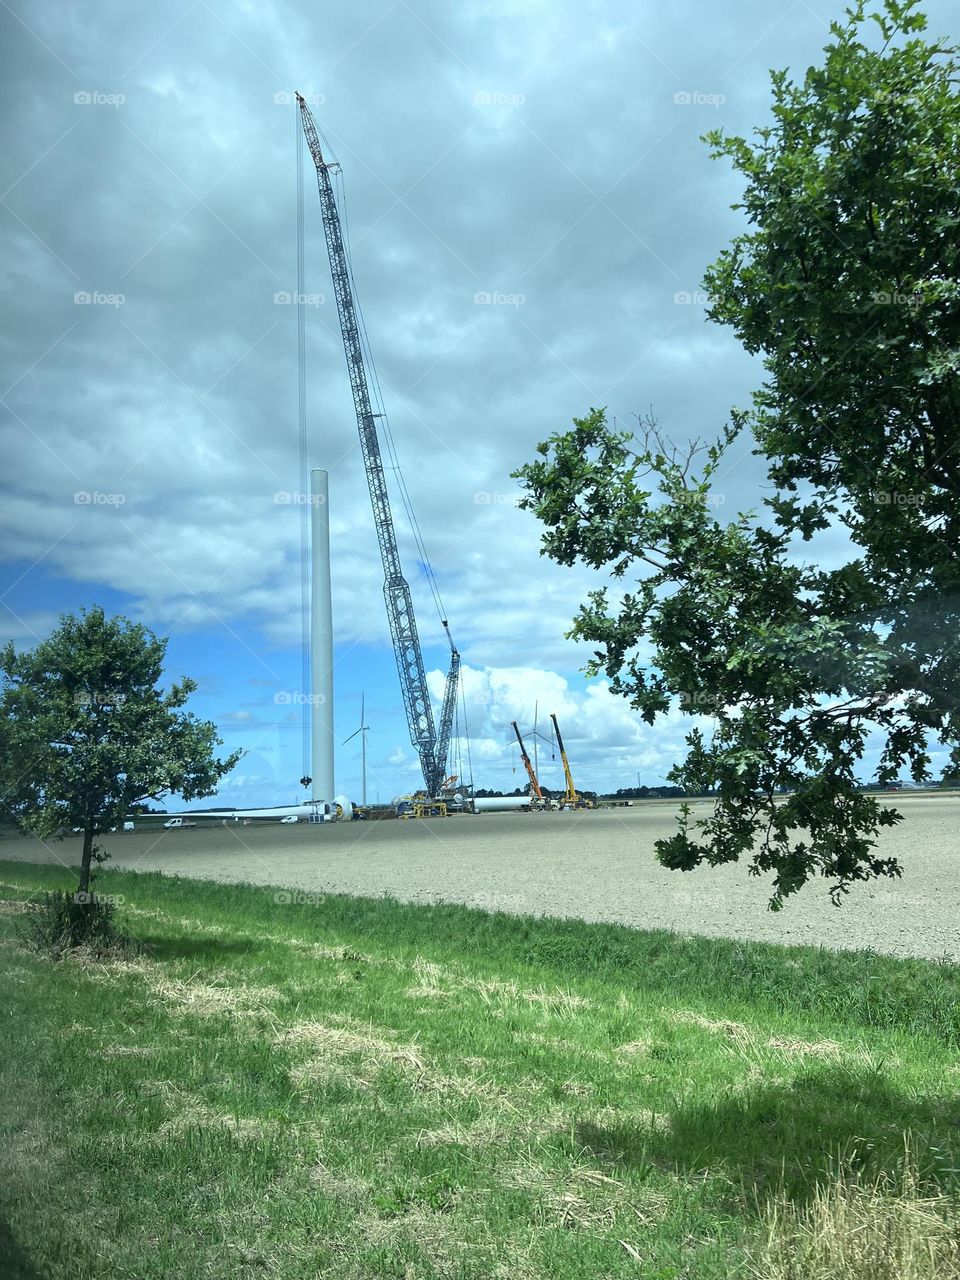 Installing a energie windmill